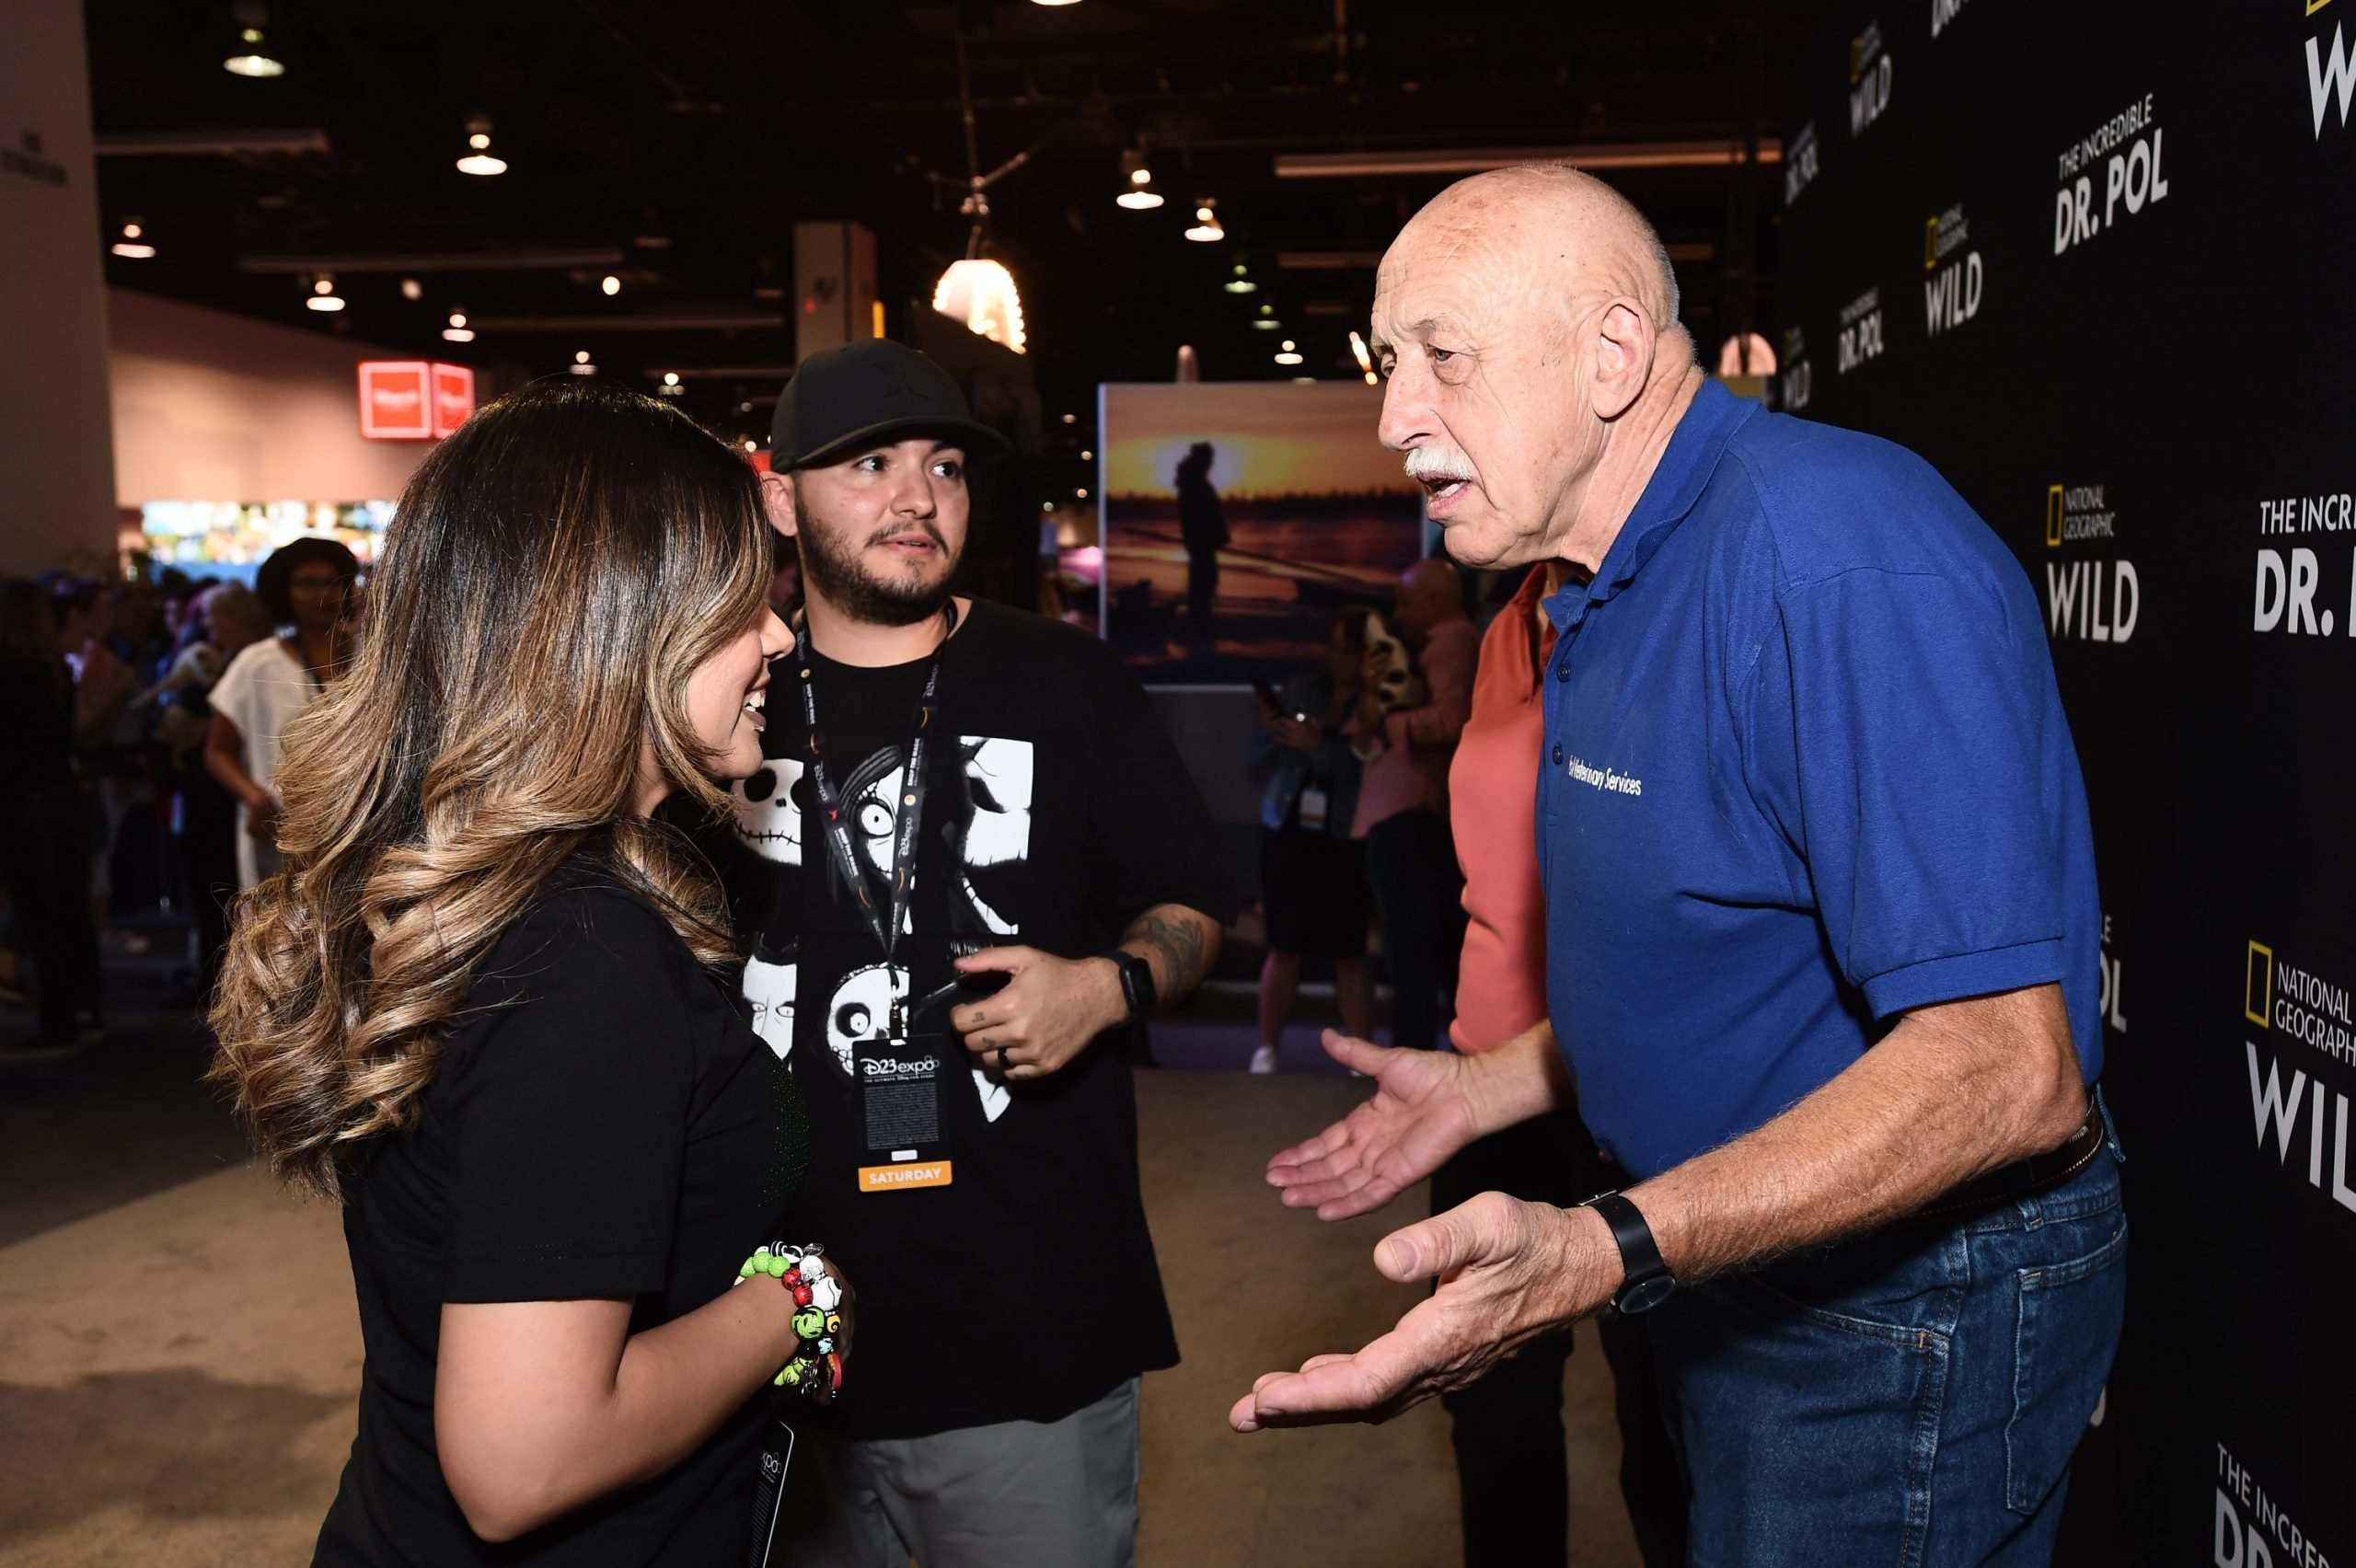 'The Incredible Dr. Pol' star Dr. Jan Pol chats with fans of the Nat Geo Wild reality show.